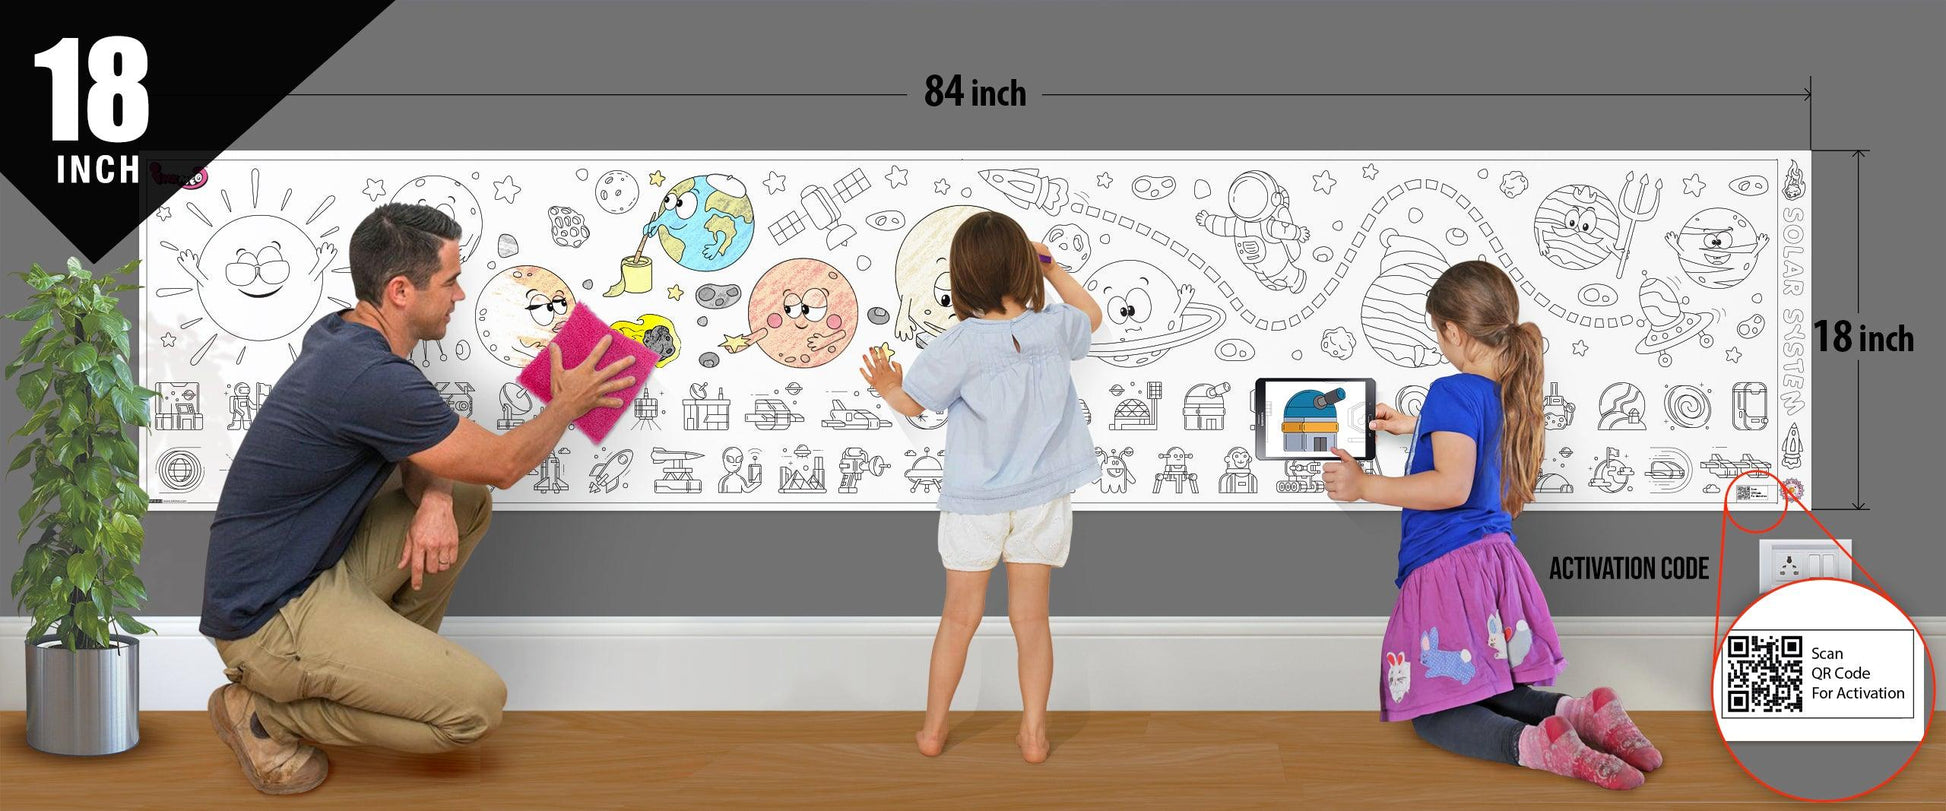 The image depicts a father and his two daughters enjoying a bonding moment while coloring solar system sheet attached to the wall.